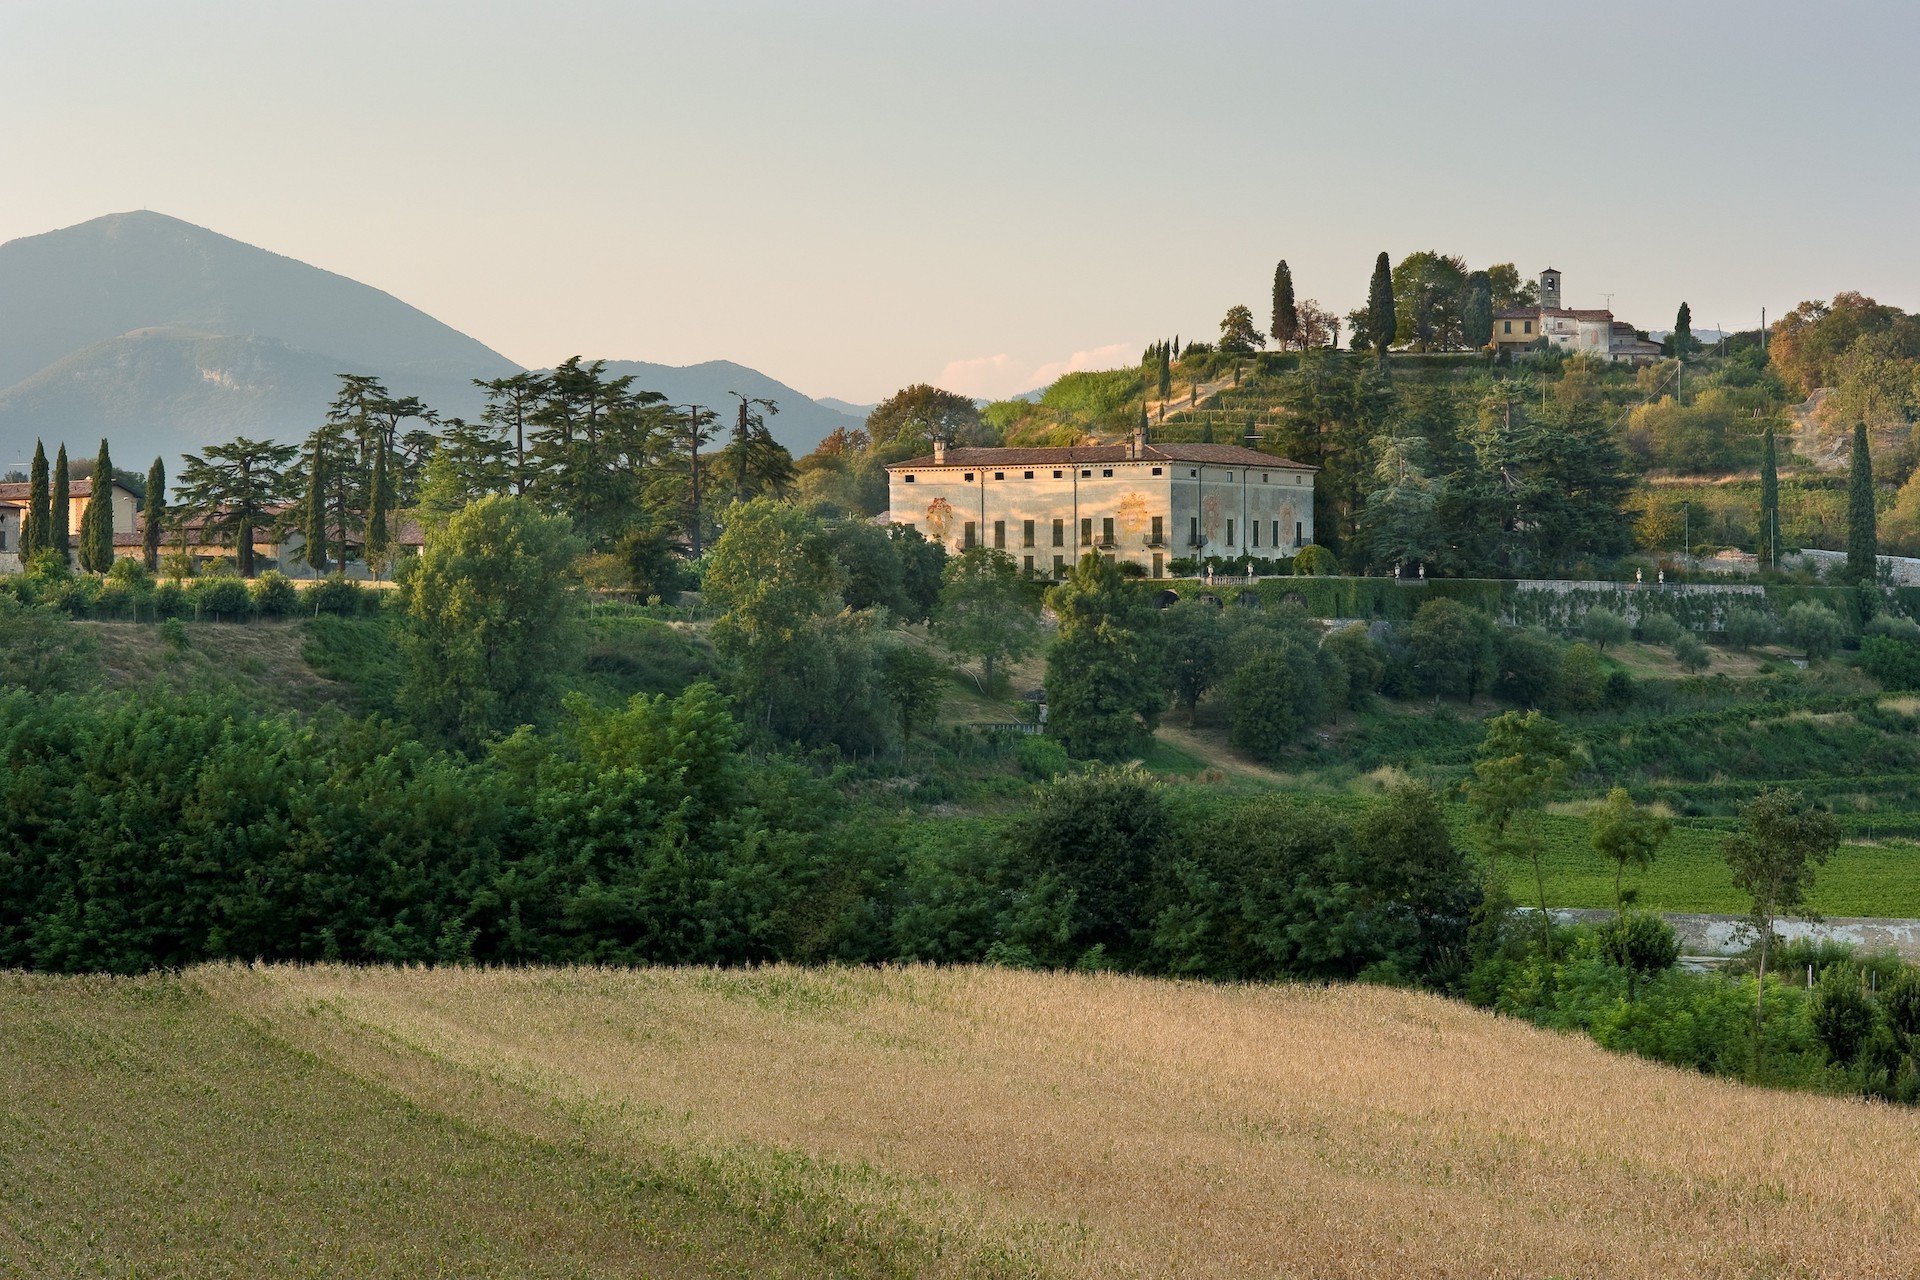 Franciacorta wines express the serenity of this Italian landscape in Lombardy.